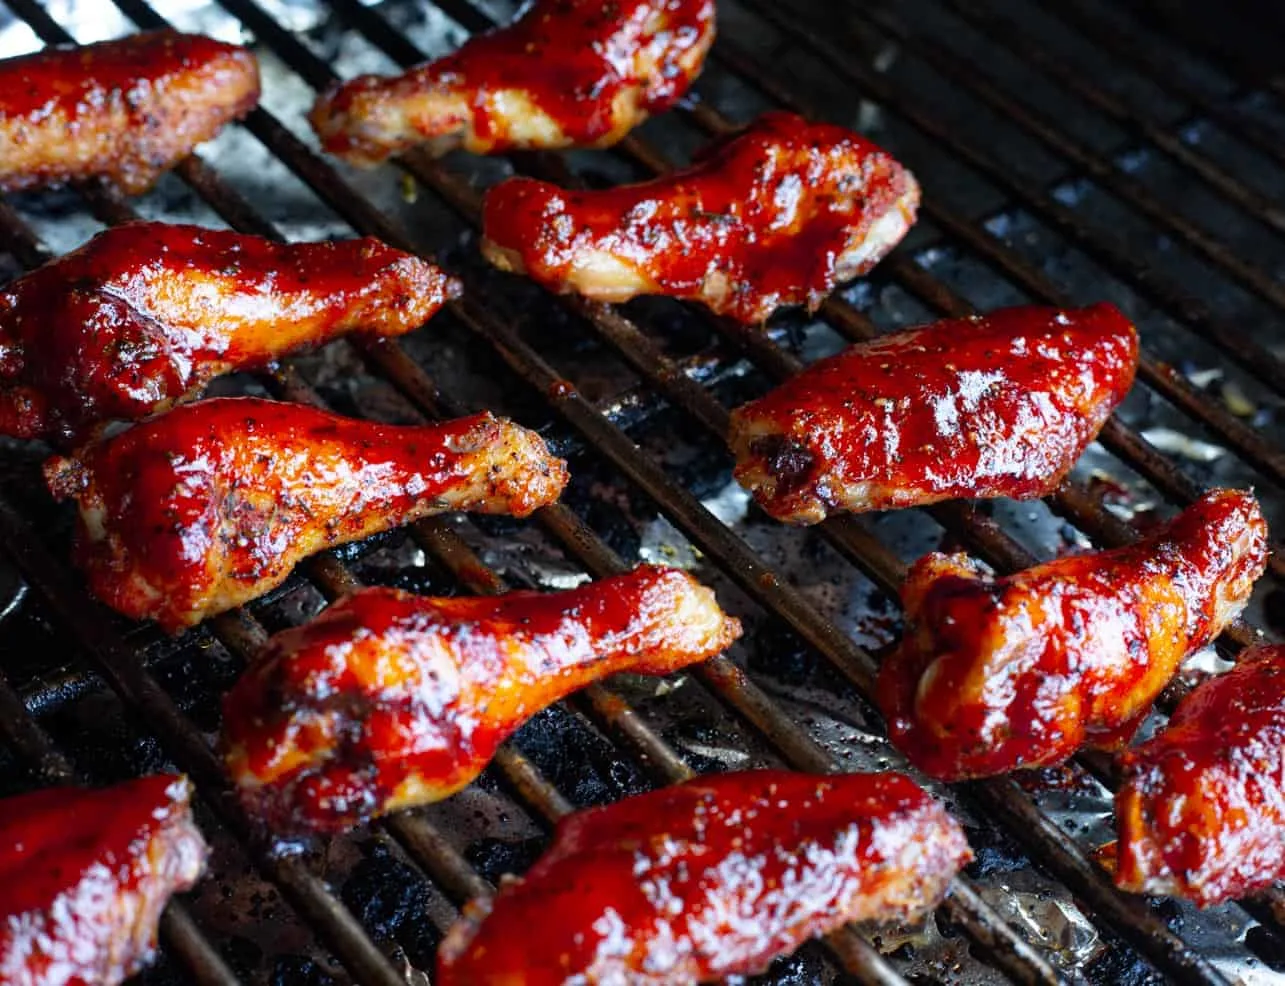 Smoked strawberry barbecue chicken wings on the grill.